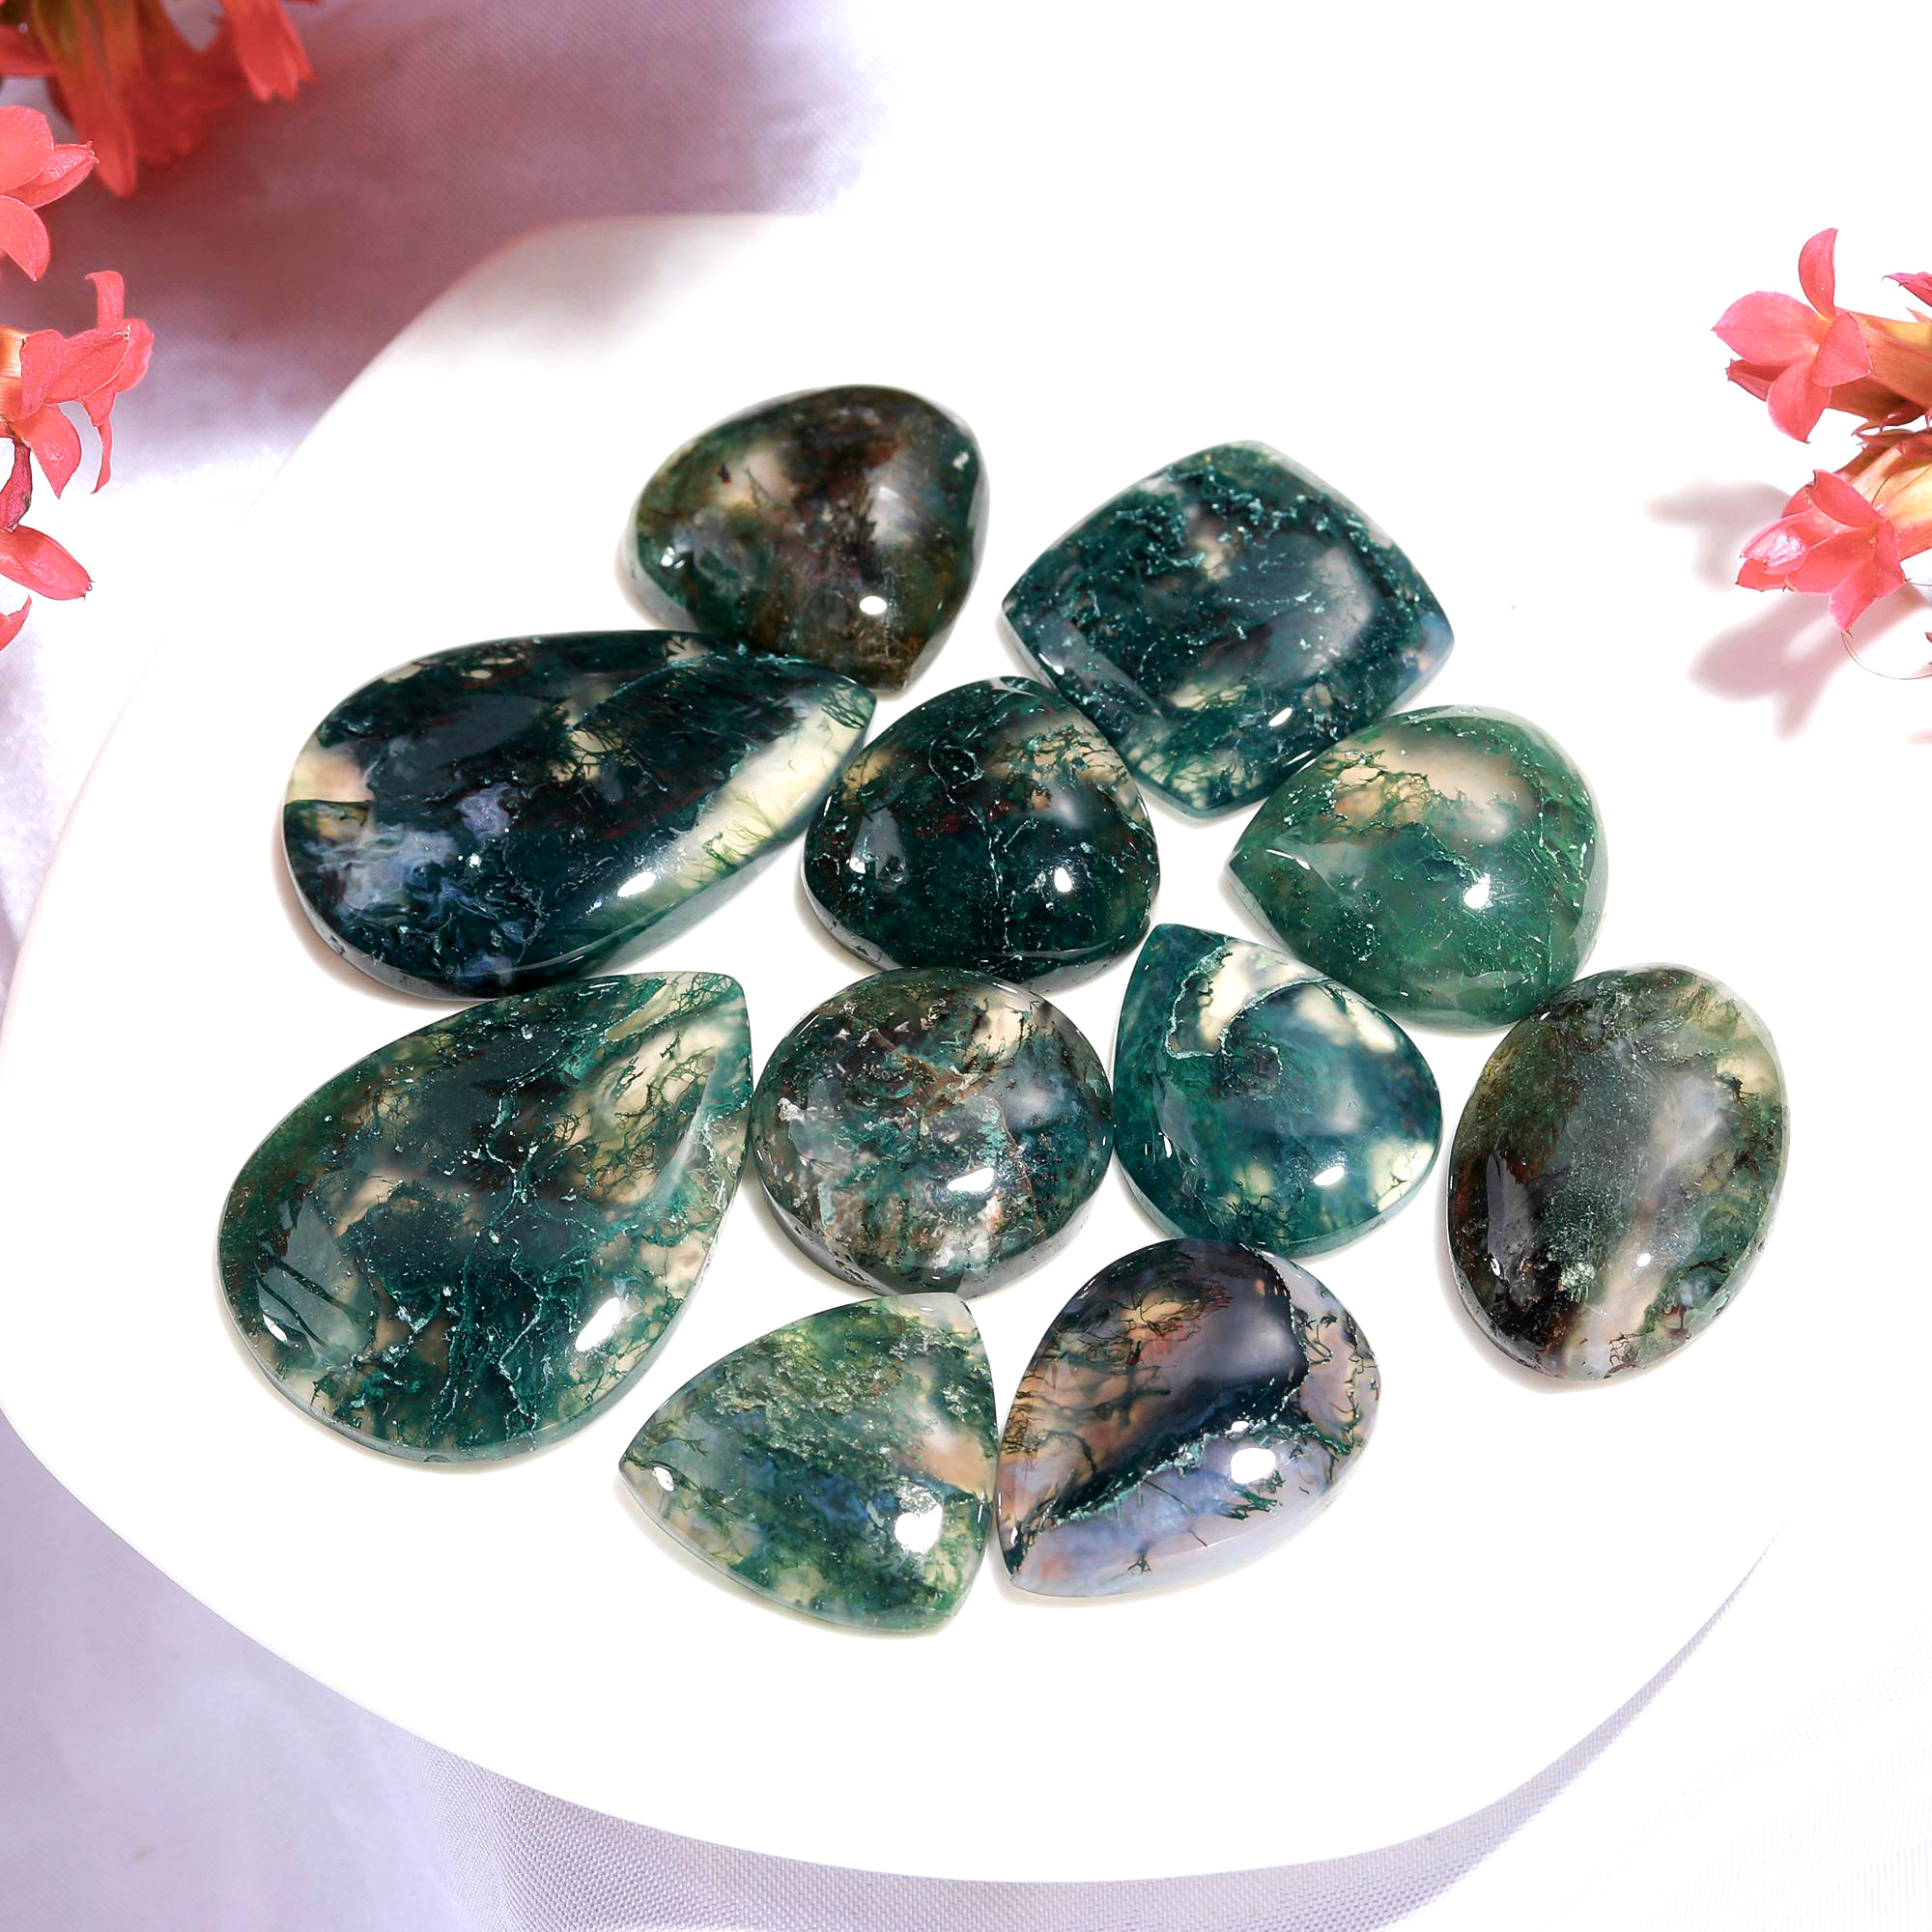 11 Pc 172 Cts Natural Green Moss Agate Mix Loose gemstone cabochon Wholesale lot polished both side Size 28x20 15x15mm